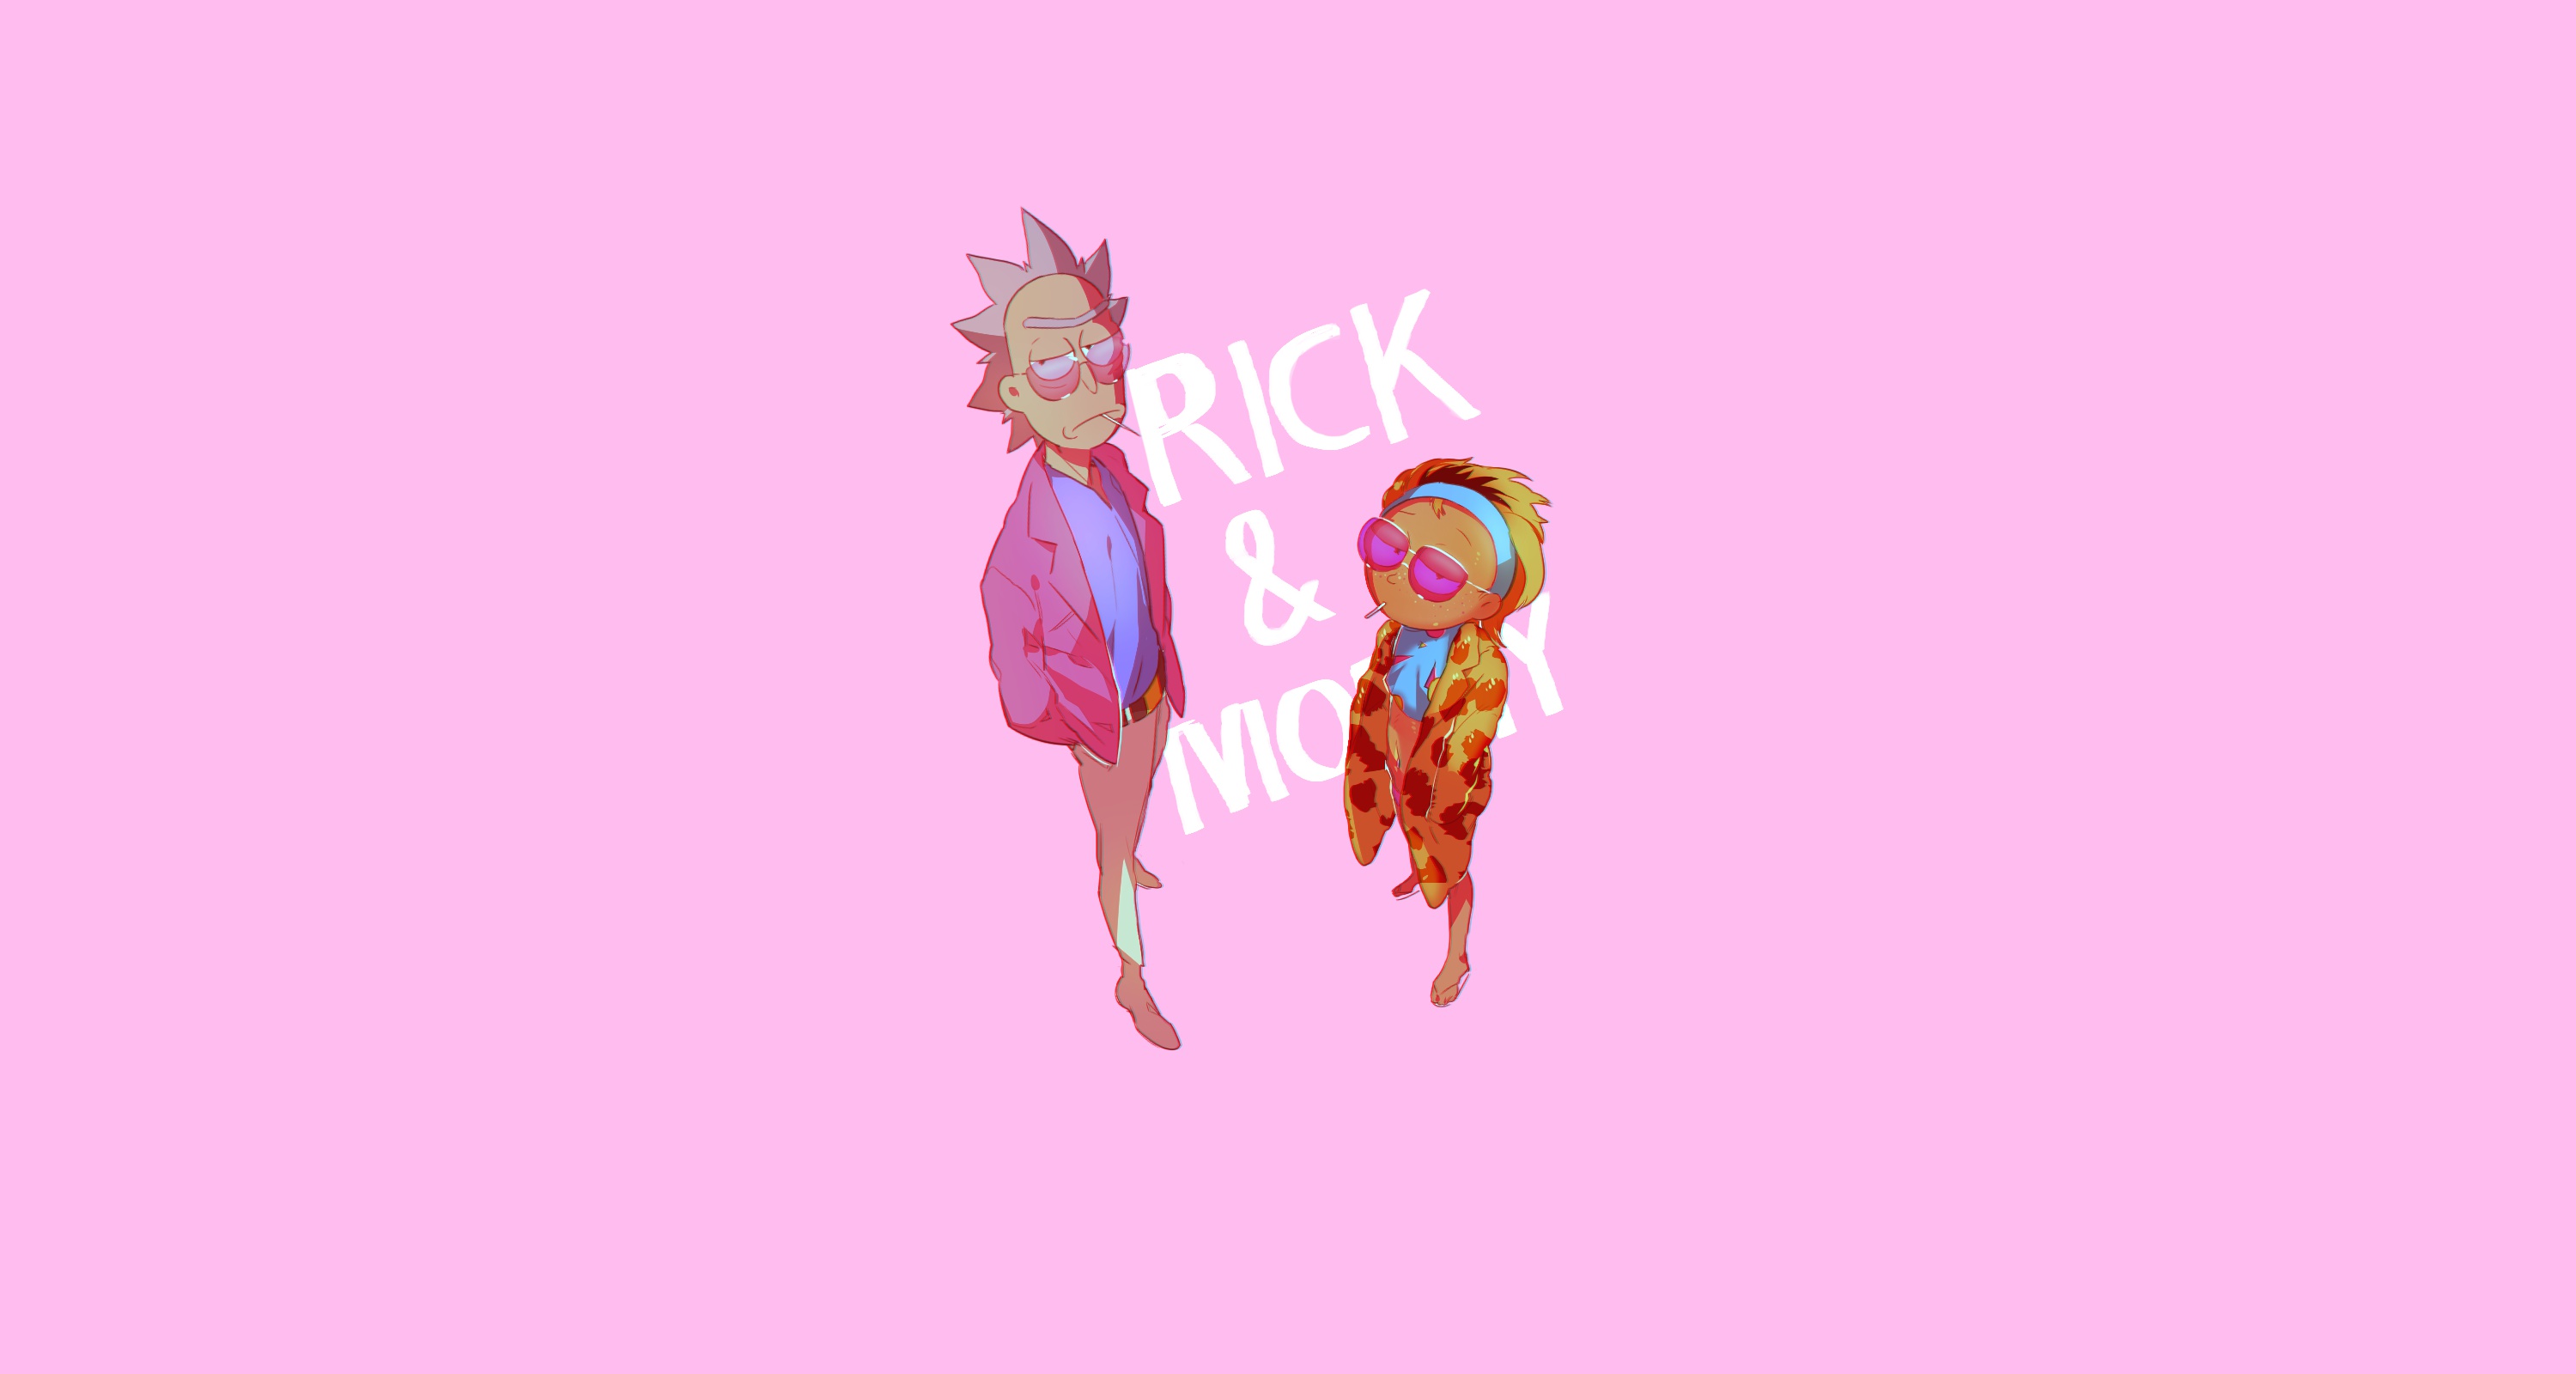 rick and morty, tv show, morty smith, rick sanchez lock screen backgrounds